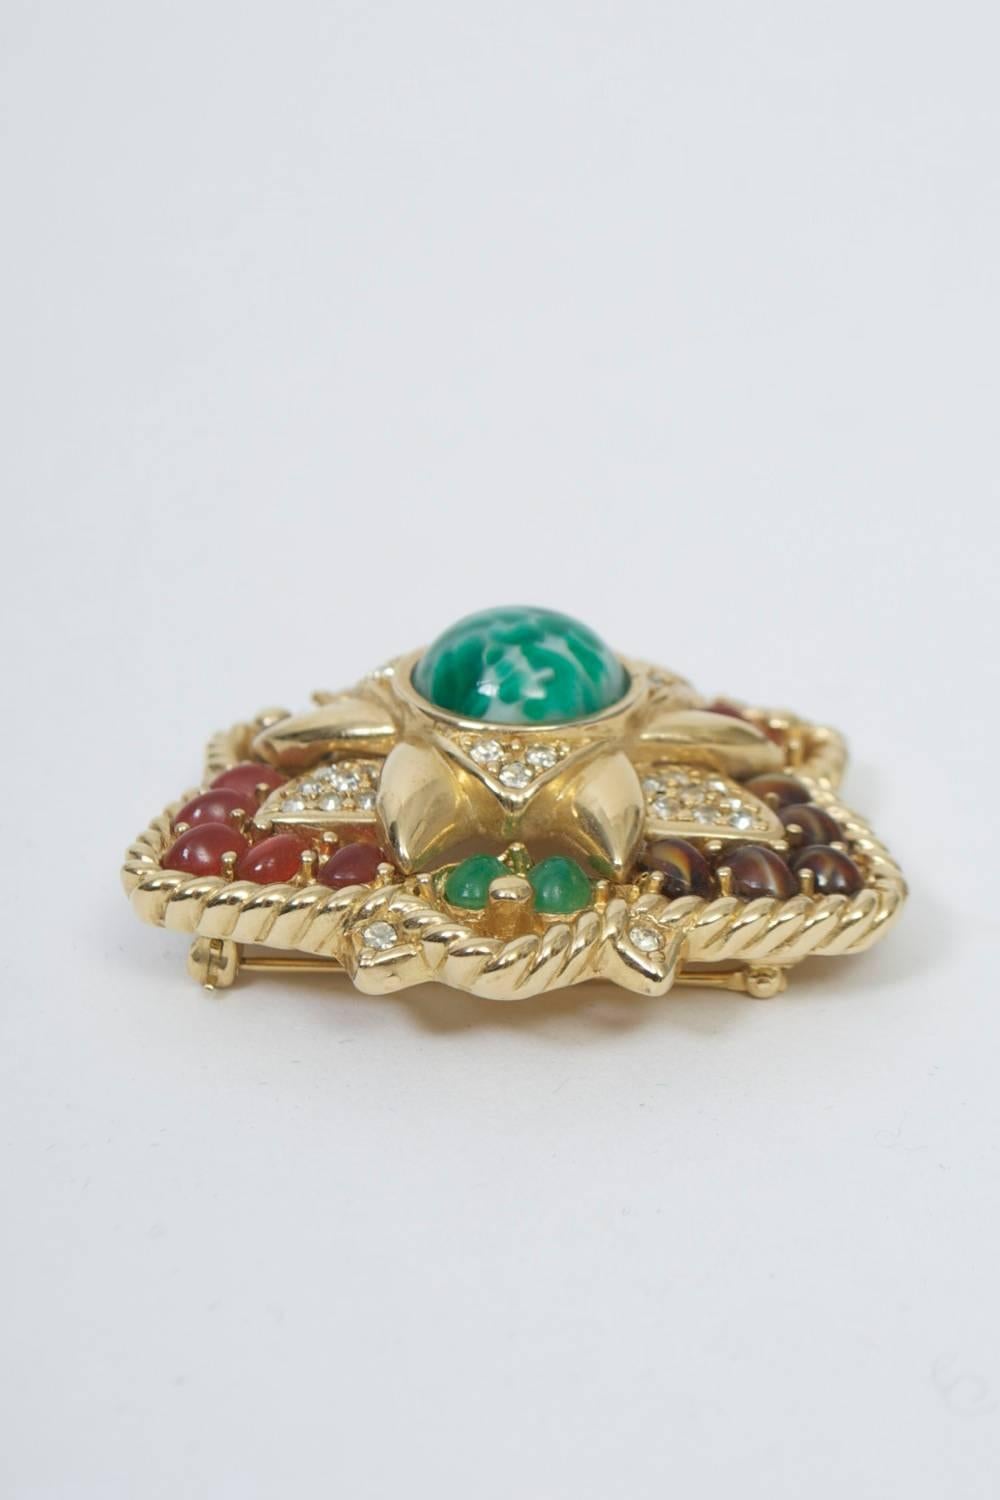 Ciner brooch of gold tone metal set with mutilcolored stones. Basically triangular in shape with protrusions that lend it a star pattern, each of the main three sections set with smooth stones in green, red, brown, respectively, within the rope